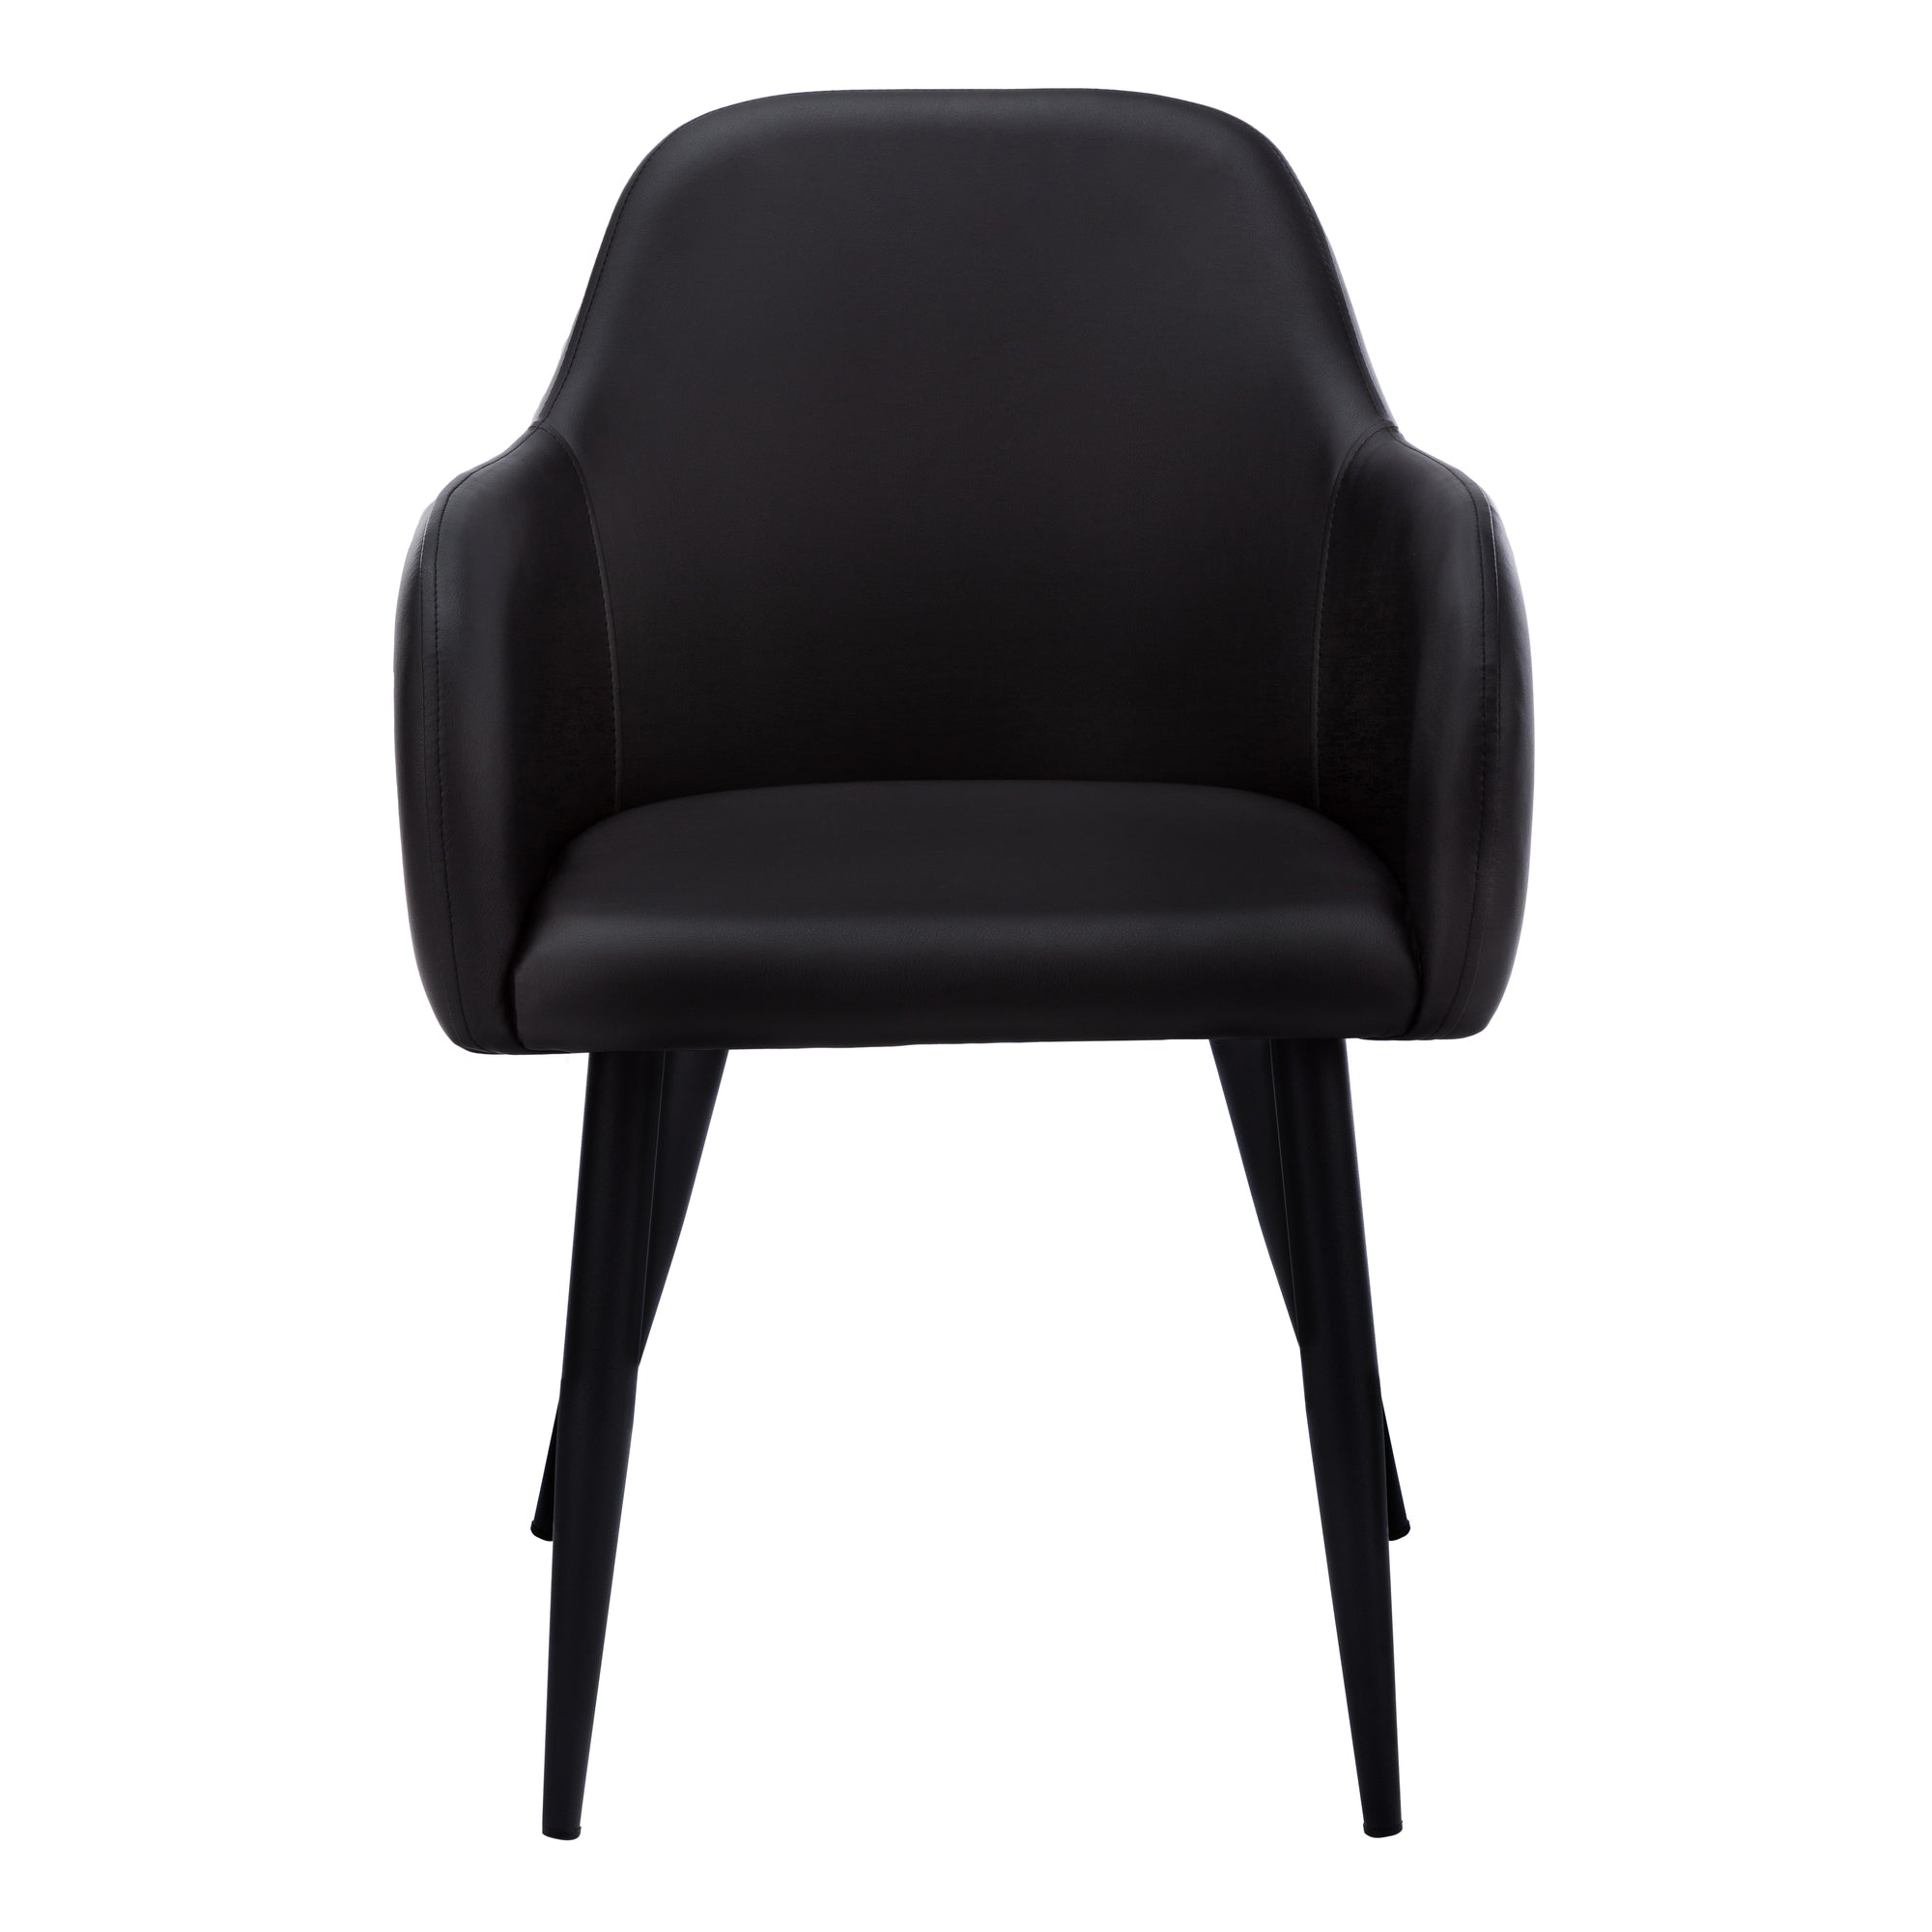 Dining Chair - 2Pcs / 33H / Black Leather-Look / Black